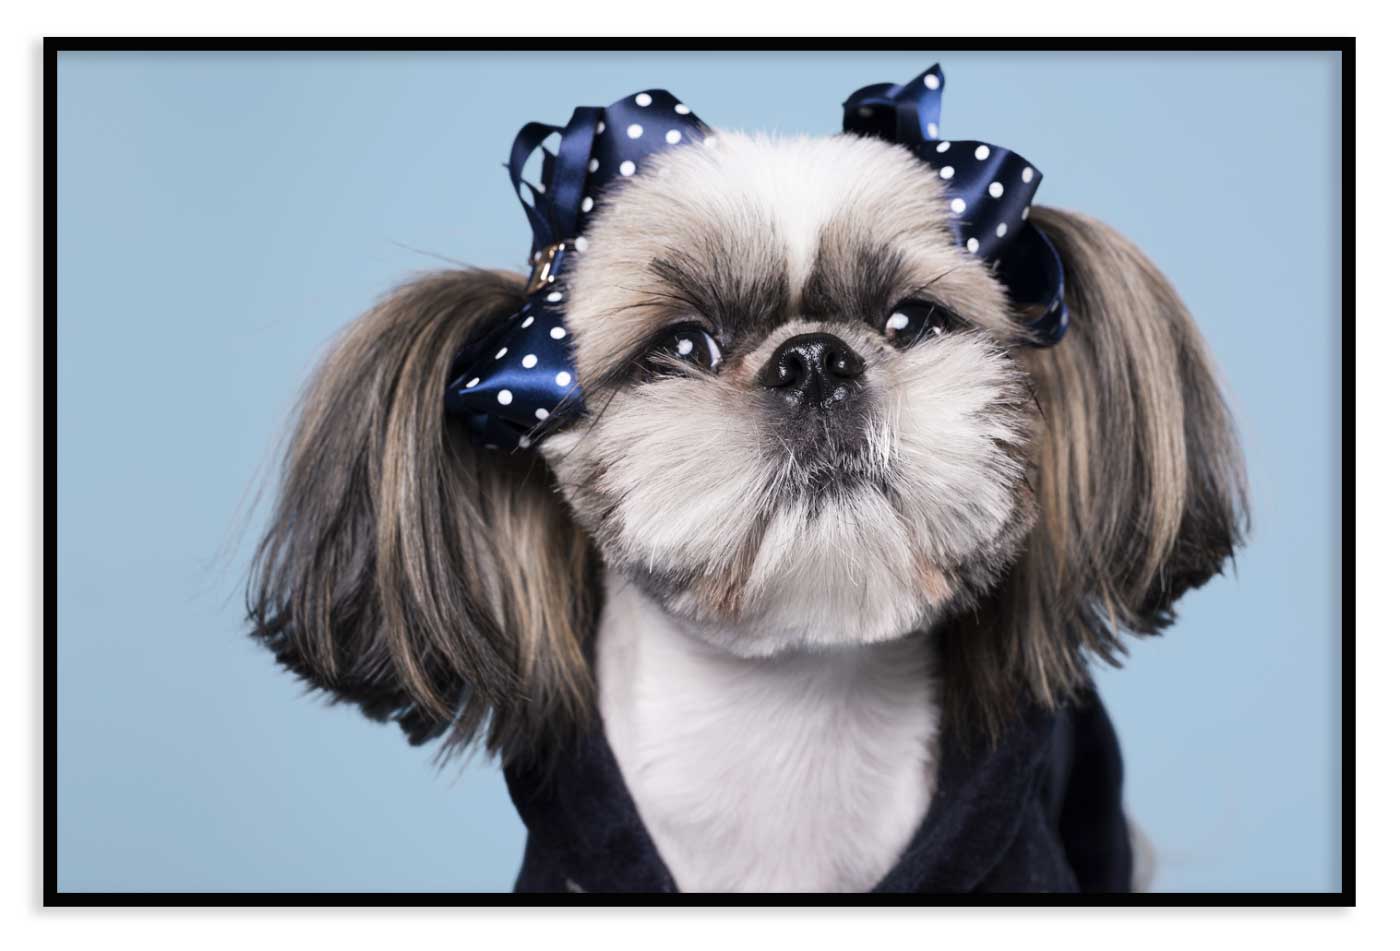 Cute Poster Picture Print Sizes A5 to A0 **FREE DELIVERY** SHIH TZU PUPPY DOG